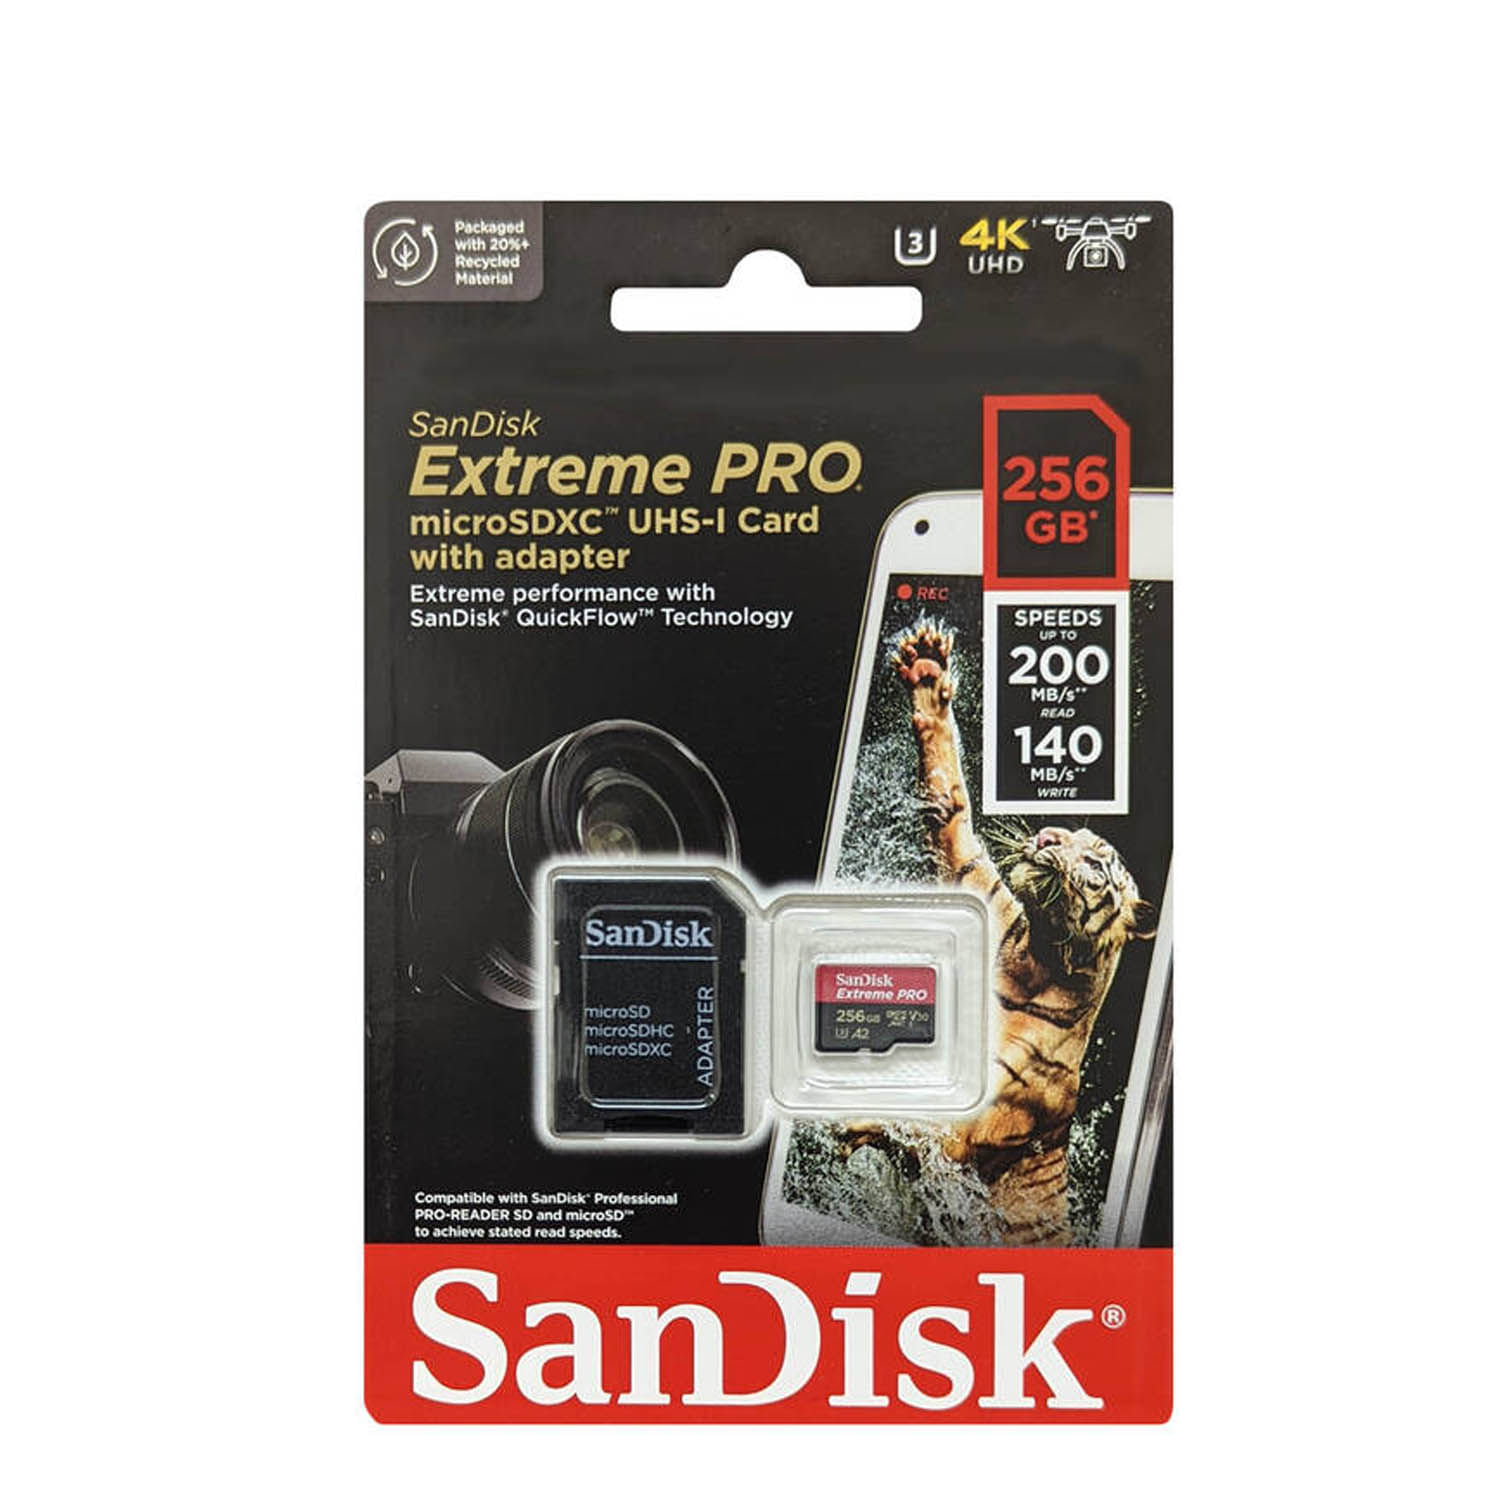 Memoria Sandisk Micro SD Extreme Pro 256GB 4k 200MBS A2 U3 - SDSQXCD-256G-GN6MA